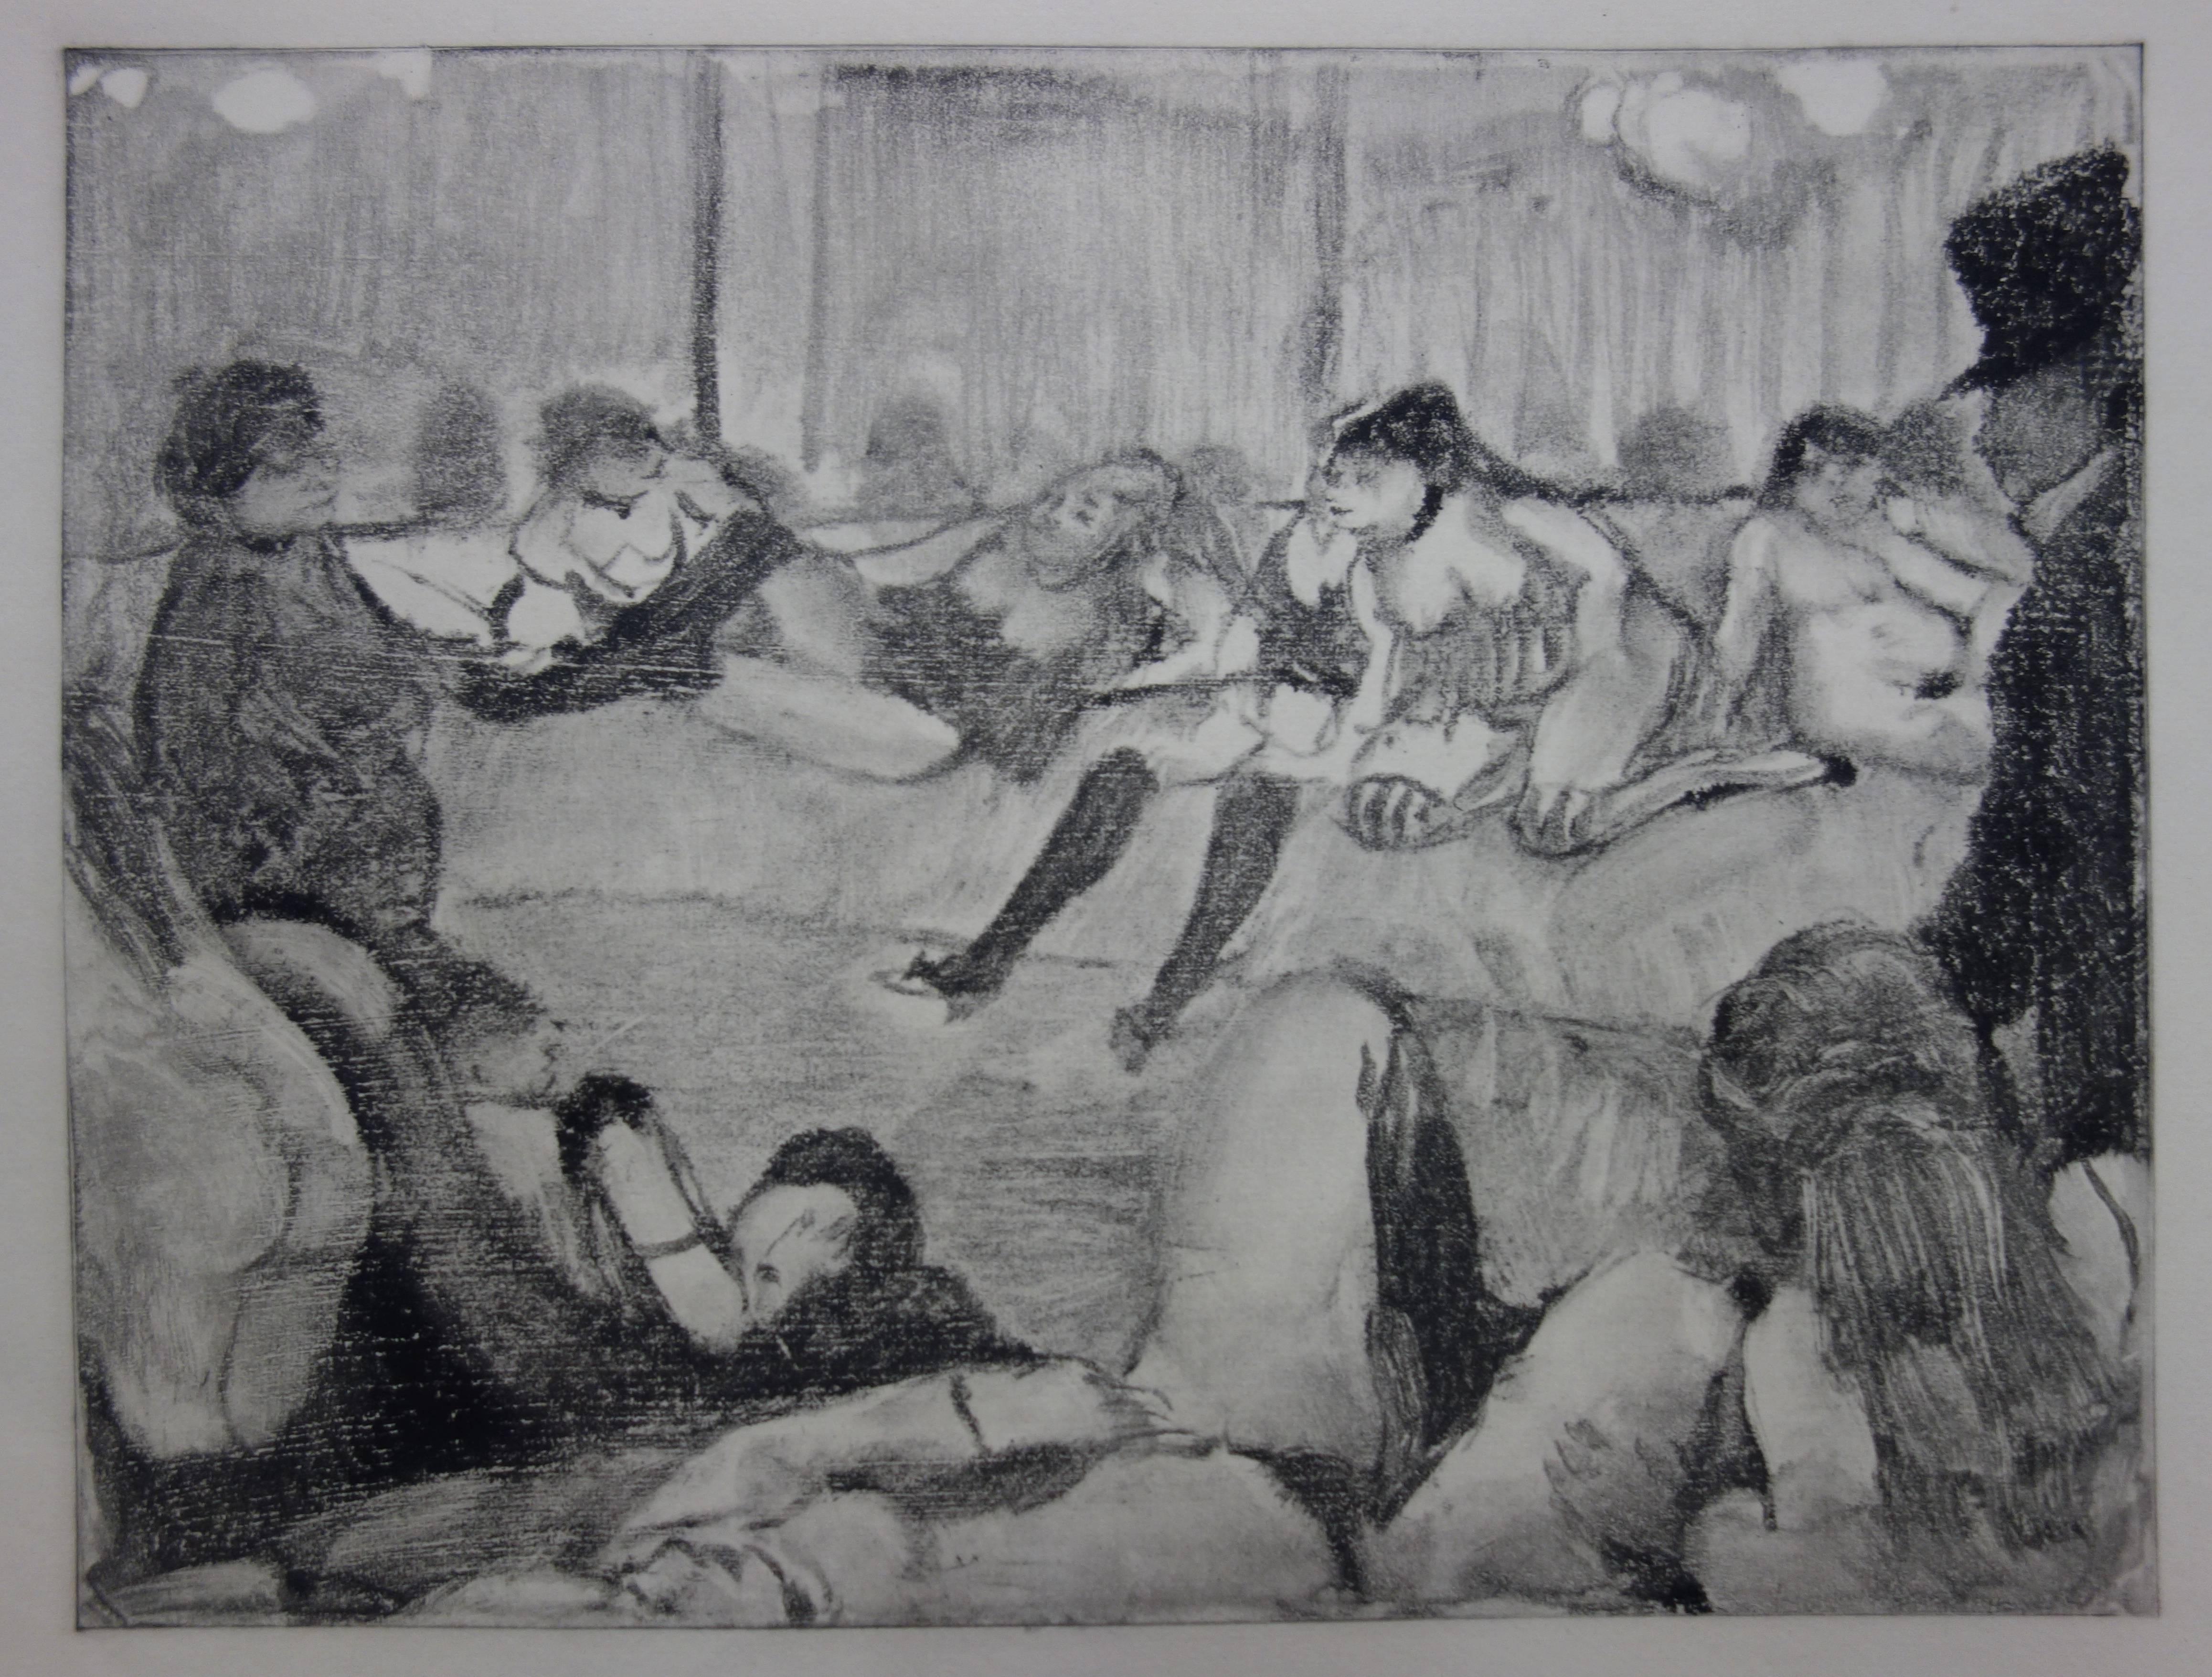 (after) Edgar Degas Figurative Print - Client Arriving in a Whorehouse - Original etching